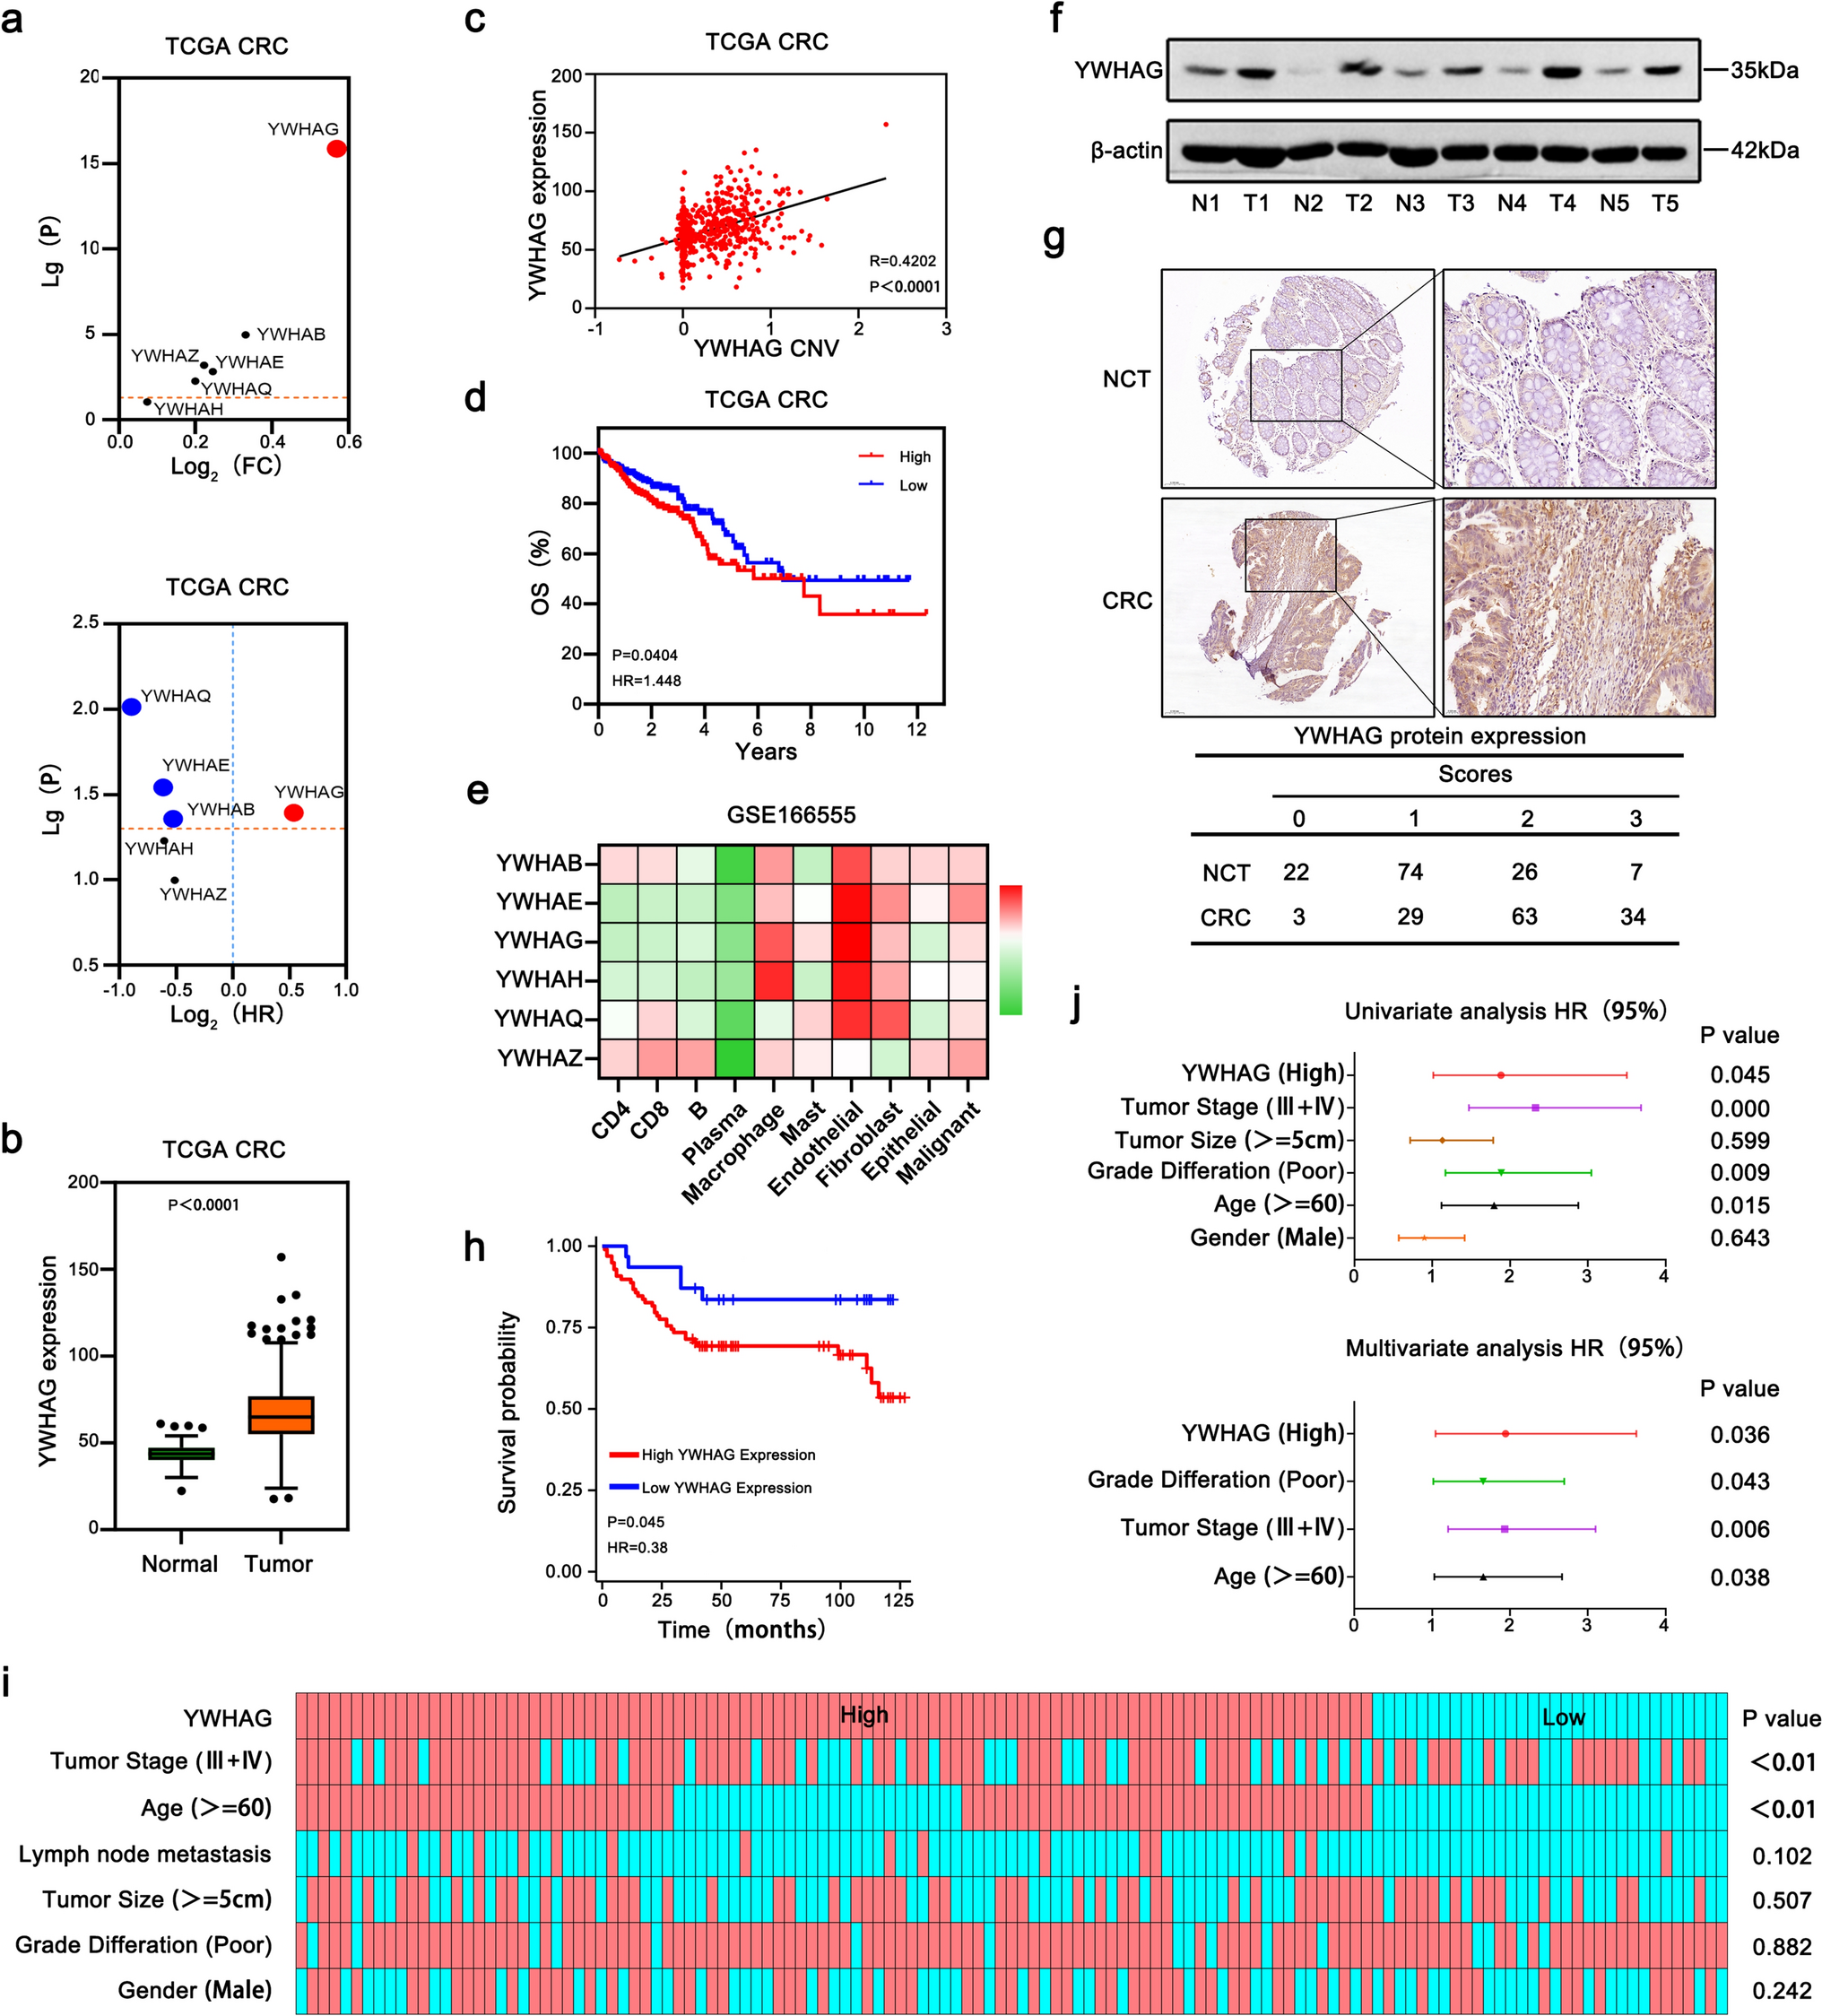 YWHAG promotes colorectal cancer progression by regulating the CTTN-Wnt/β-catenin signaling axis